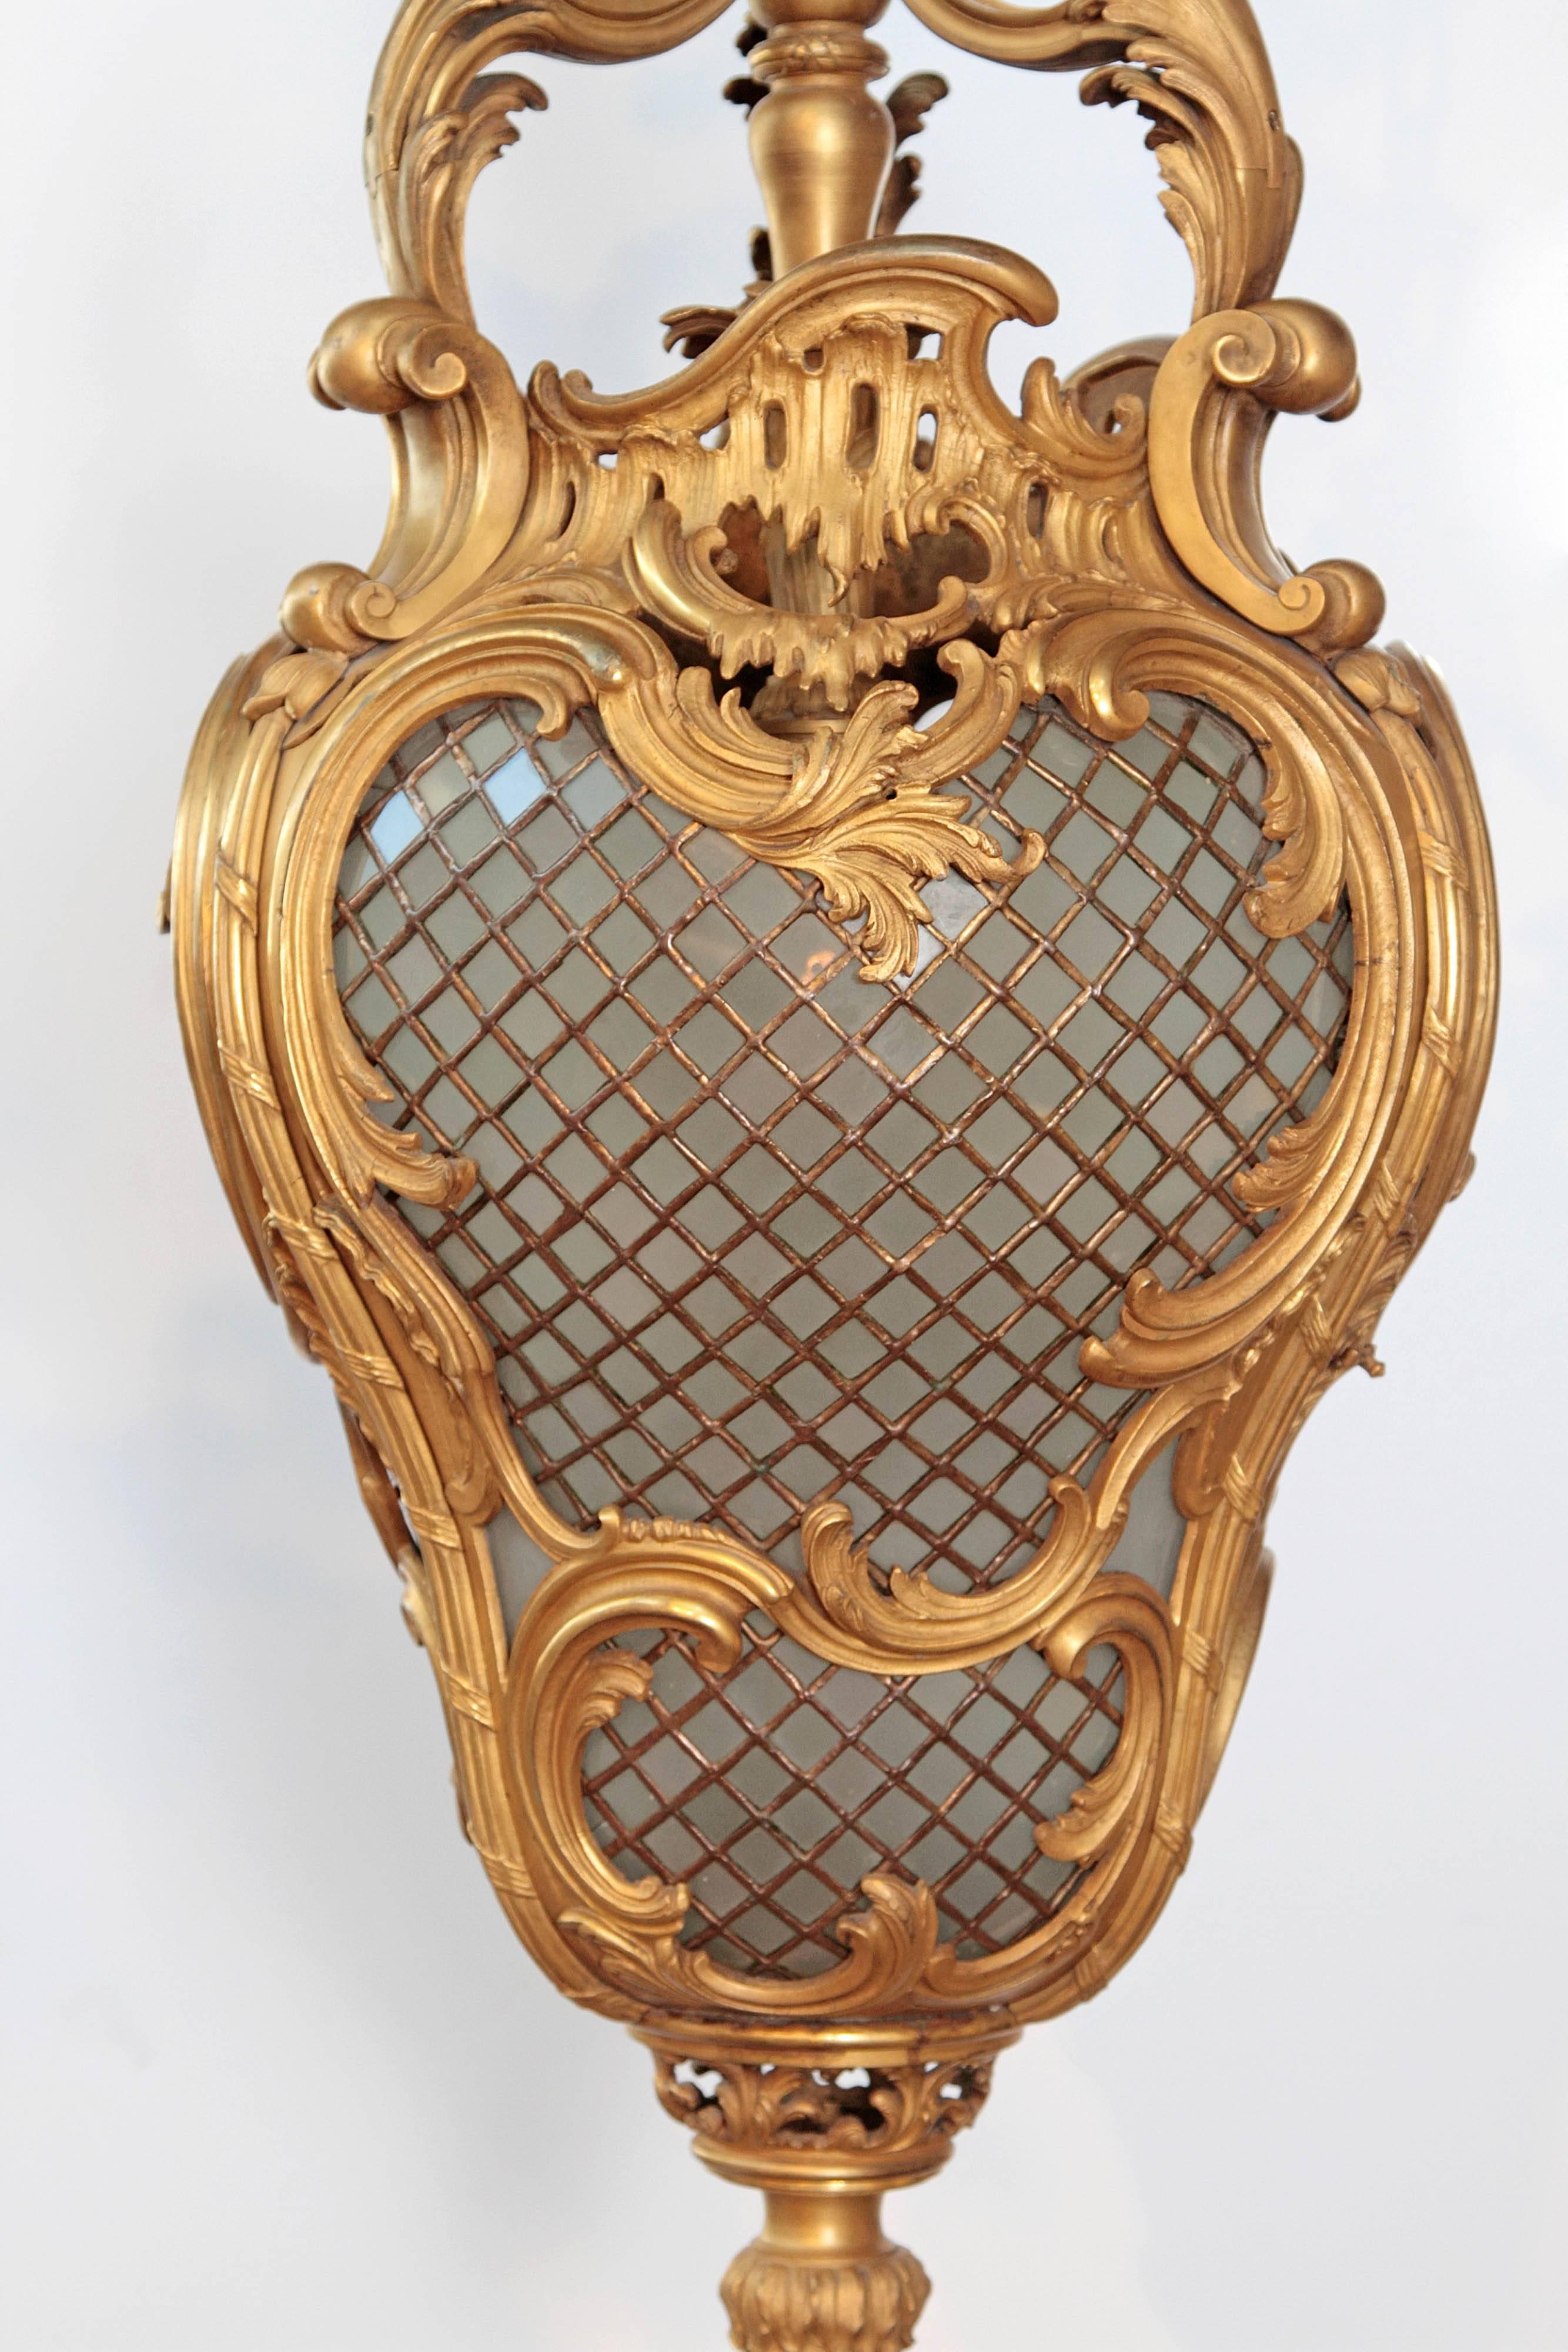 An elaborate 19th century gilt bronze hall lantern in the style of Louis XV. Curving ormolu at the top and sides of a rounded leaded glass body in a diamond pattern with more ormolu at the bottom, 19th century, France.